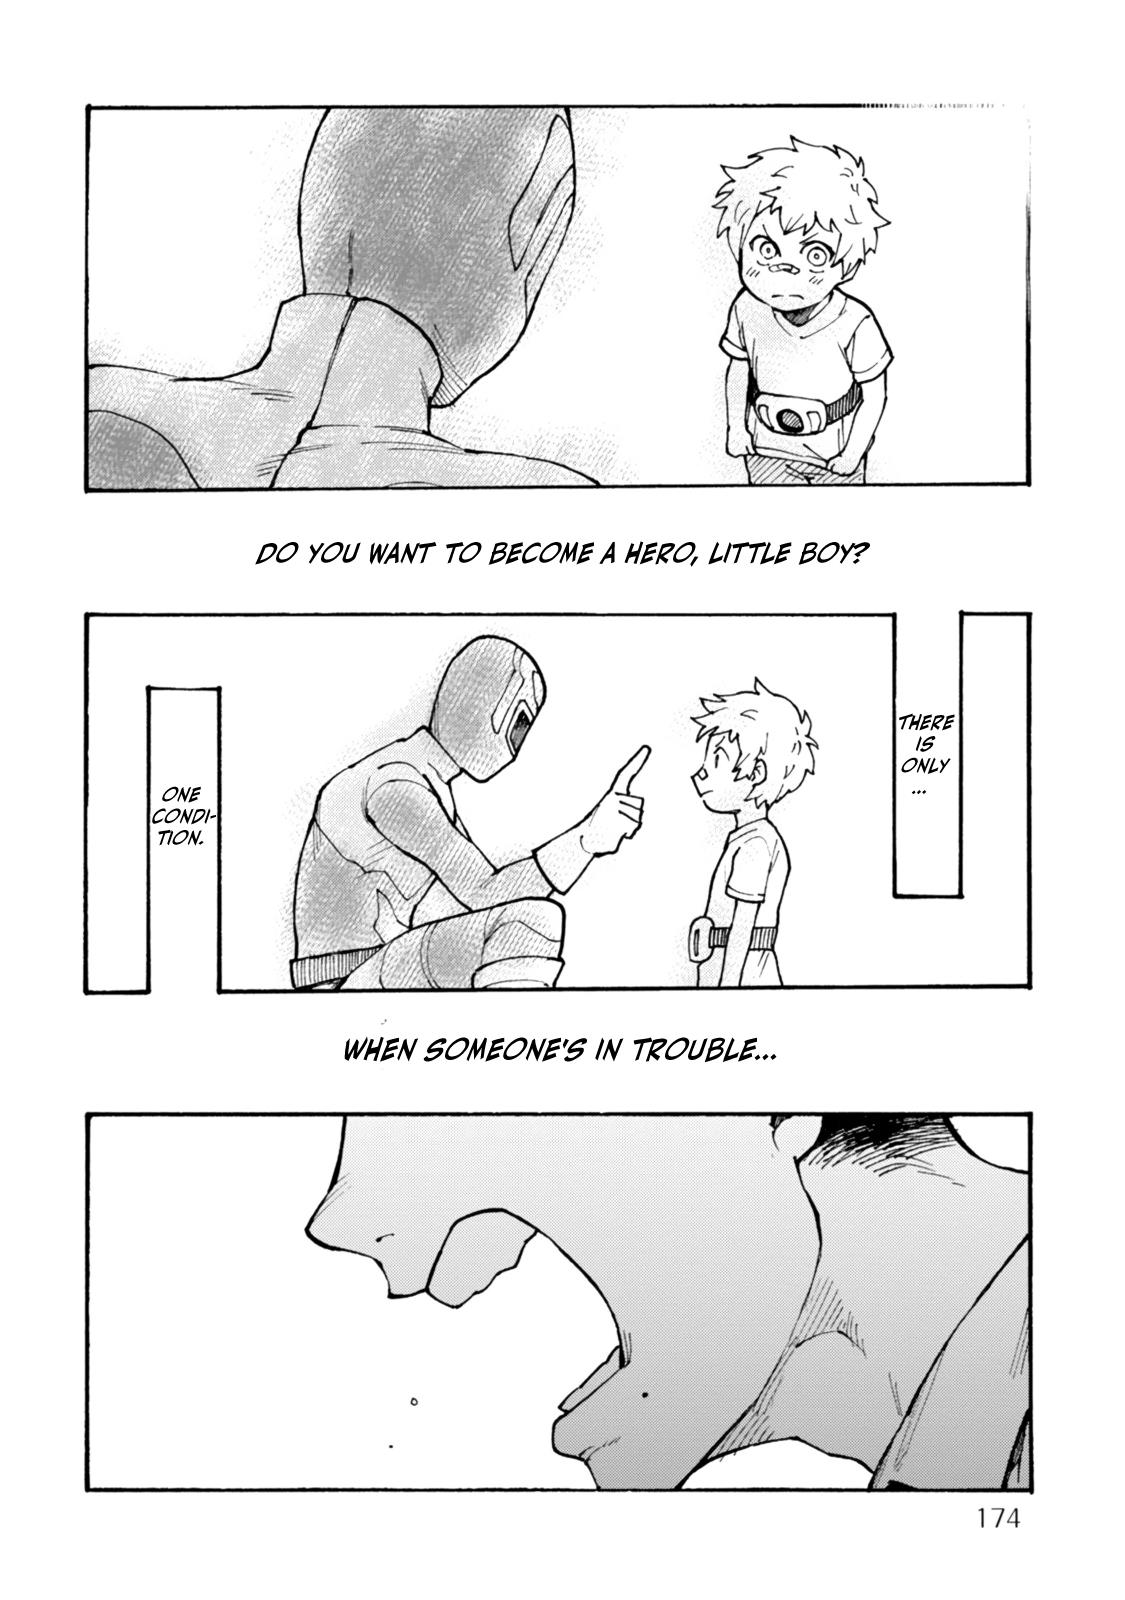 Stand By Me - Page 3